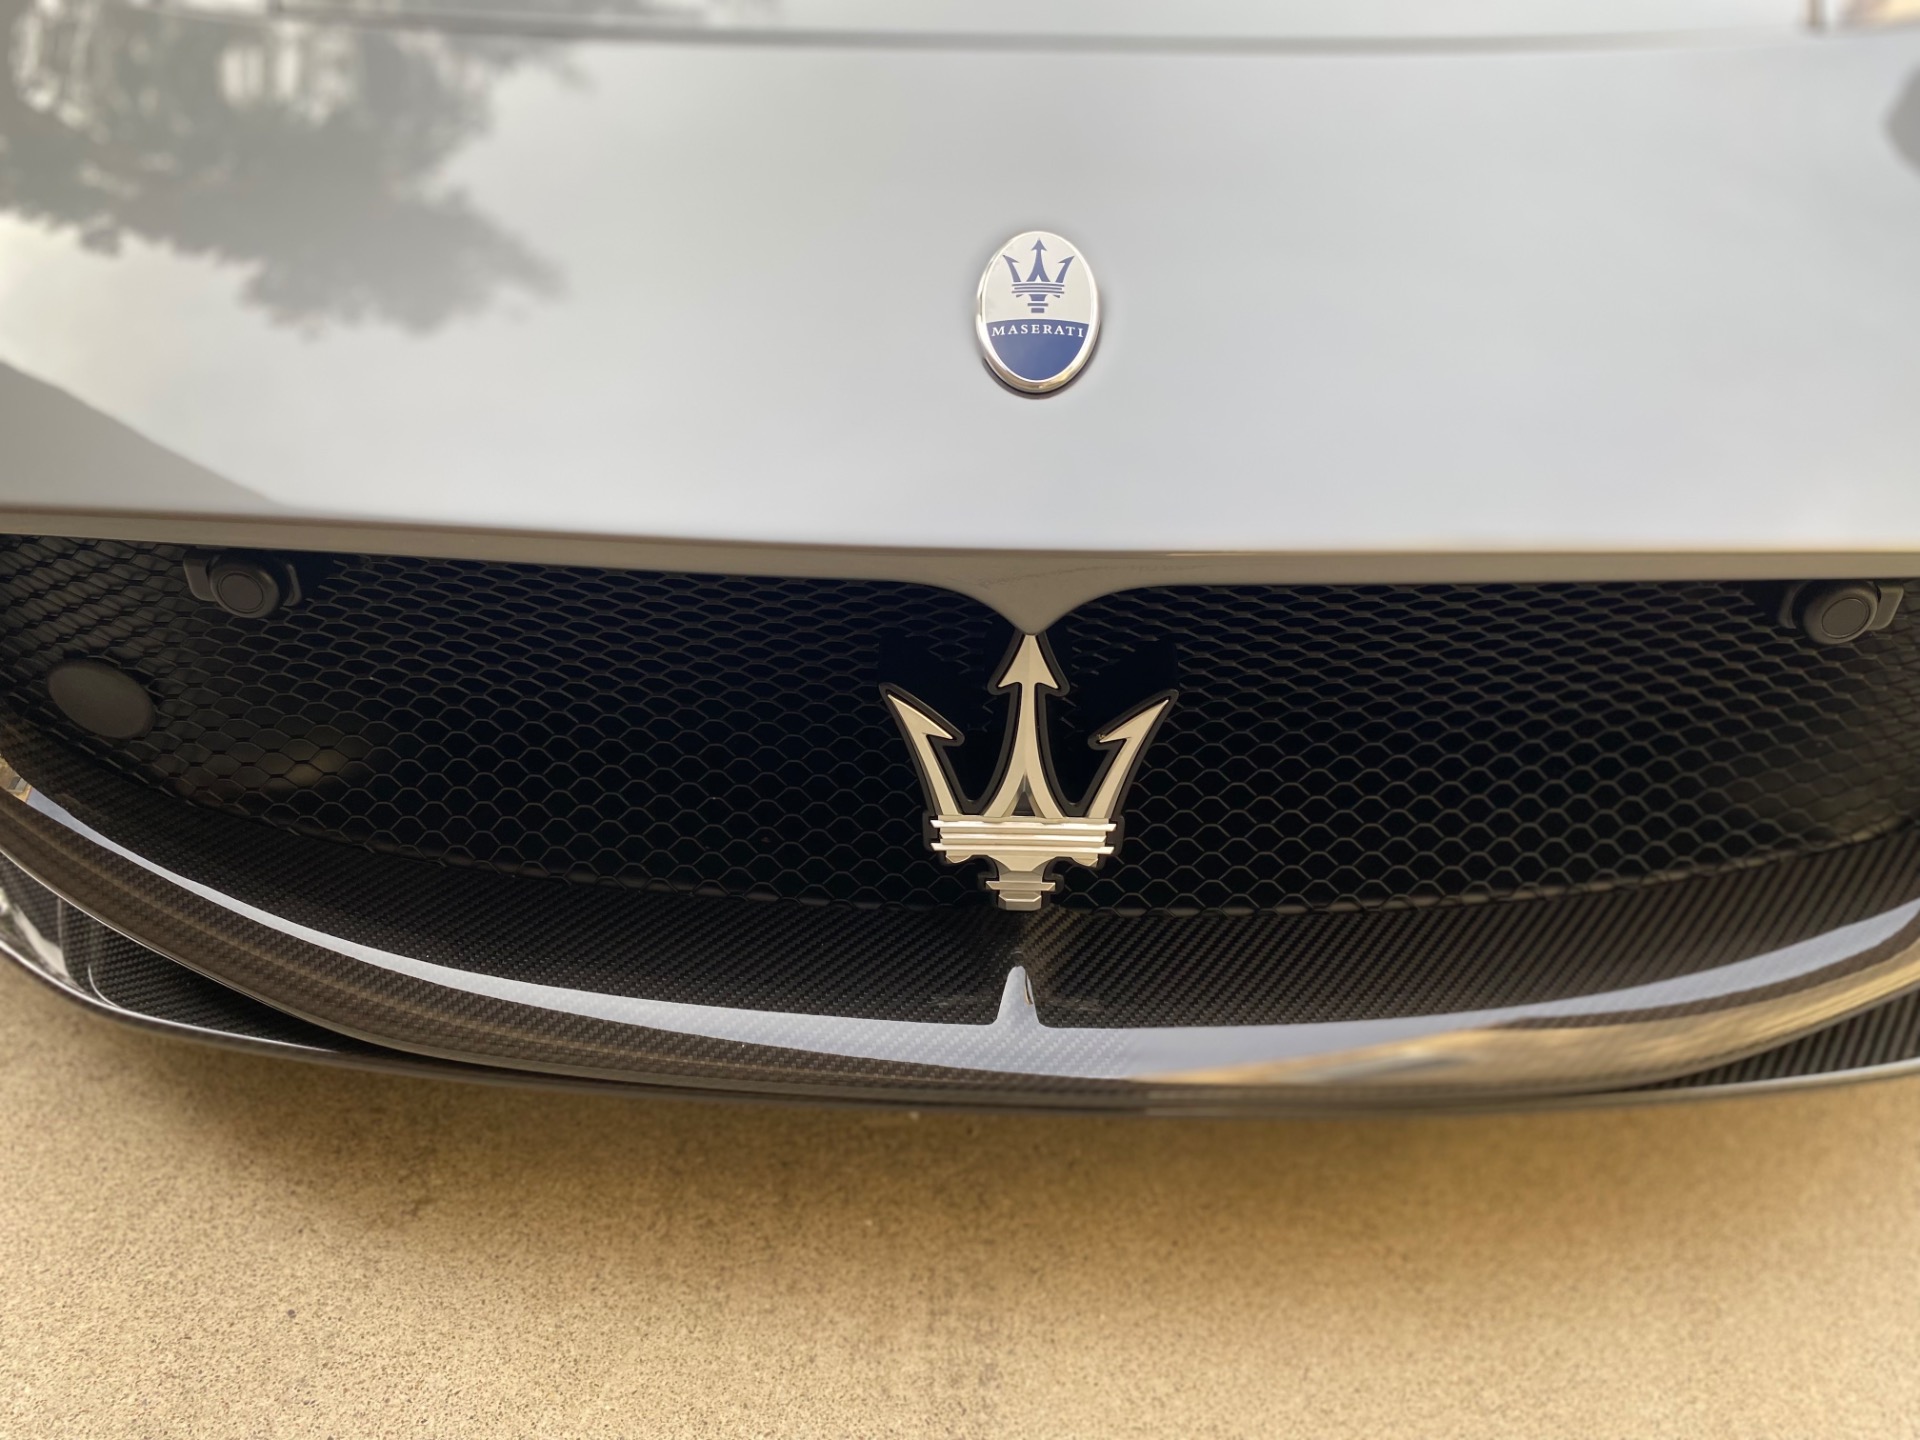 Used-2022-Maserati-MC20-Interior---exterior-Carbon-Package-Forged-Vossens-Loaded-296k-MSRP